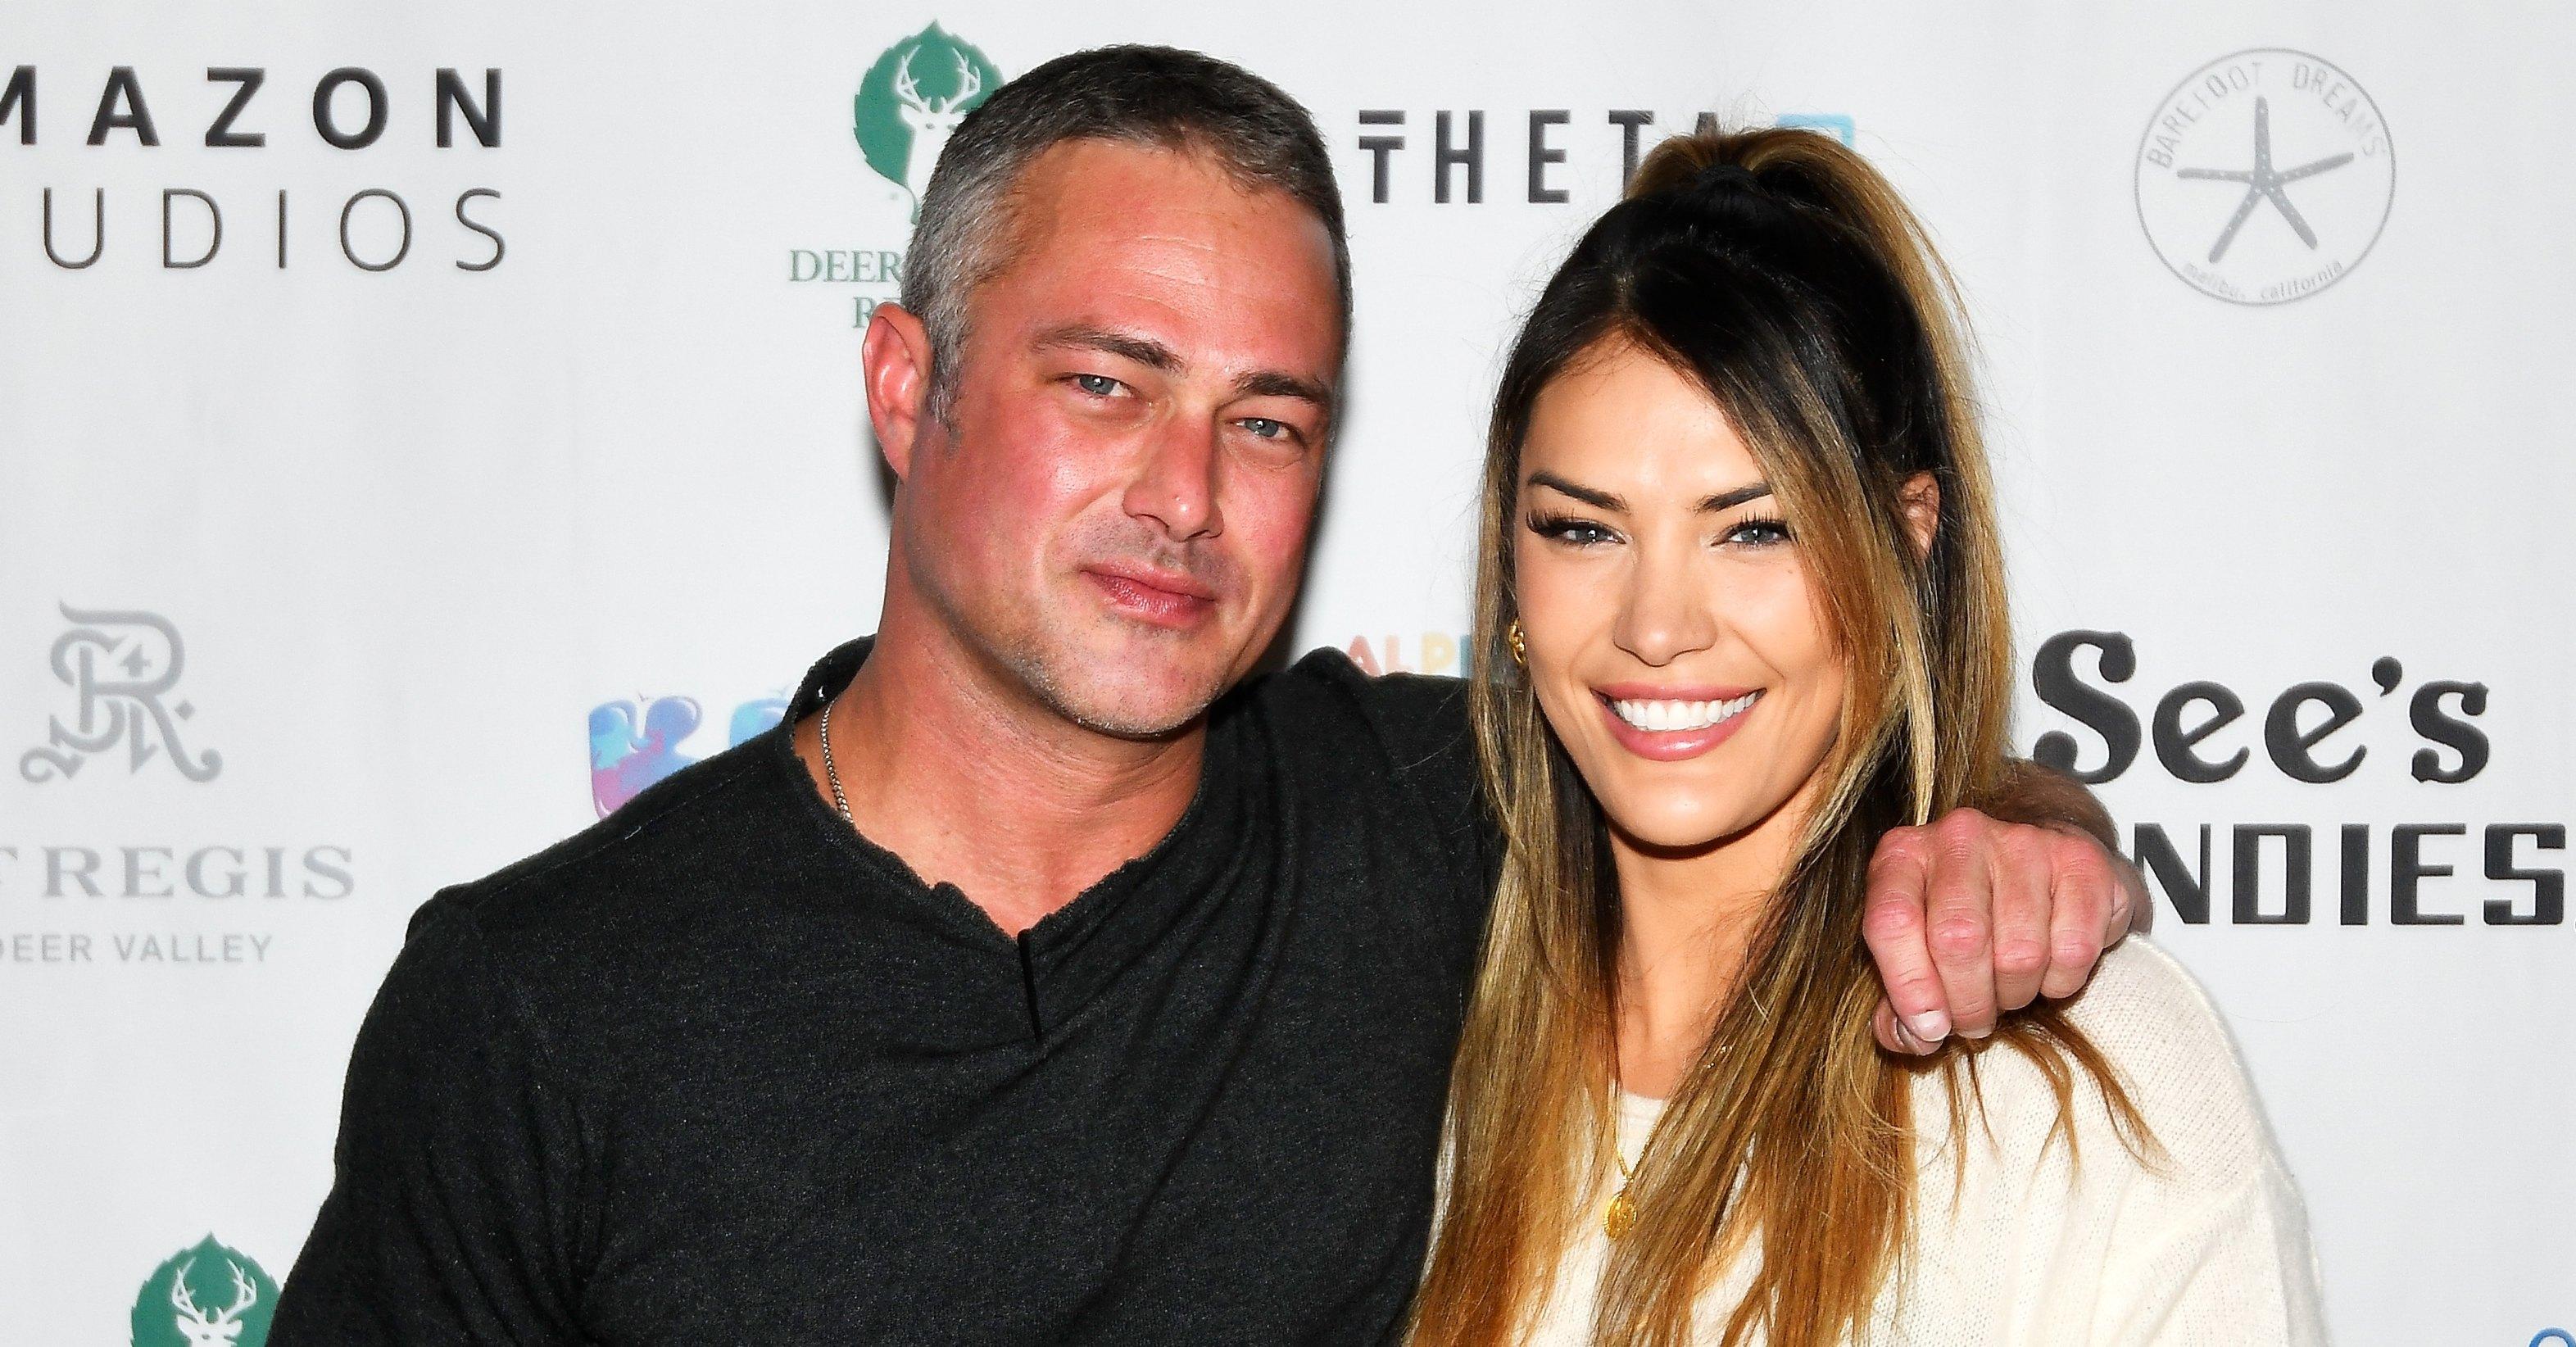 Who Is ‘Chicago Fire’s Taylor Kinney Dating? He Has a New Girlfriend